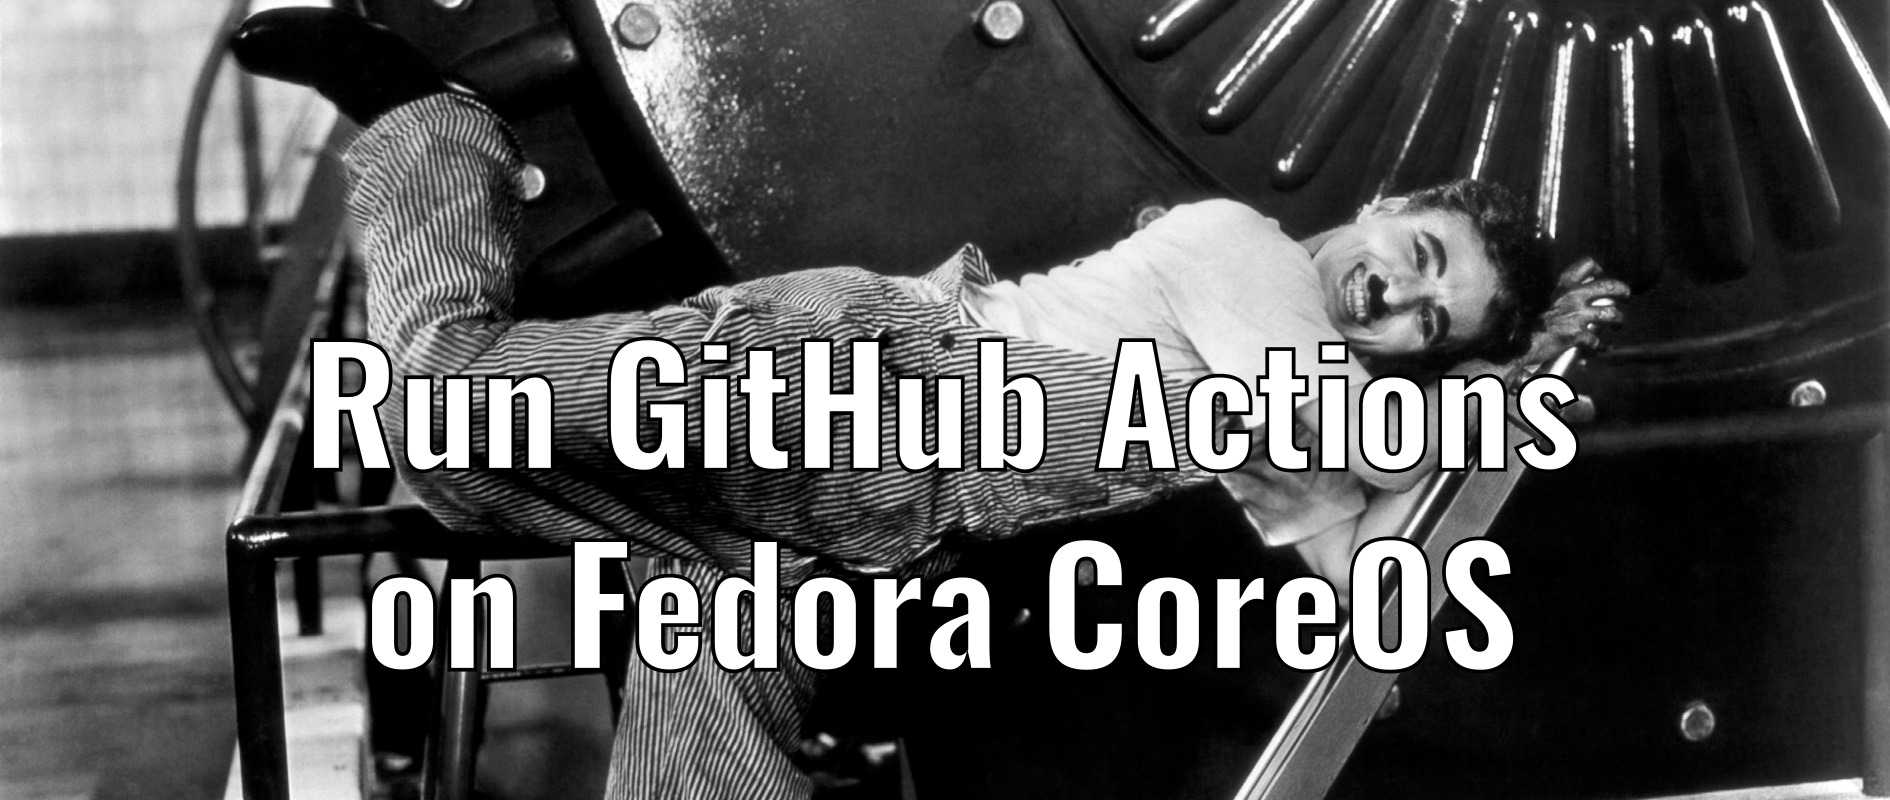 GitHub Actions is a service provided to quickly setup continuous integration and delivery (CI/CD) workflows . These workflows  run on hosts called run